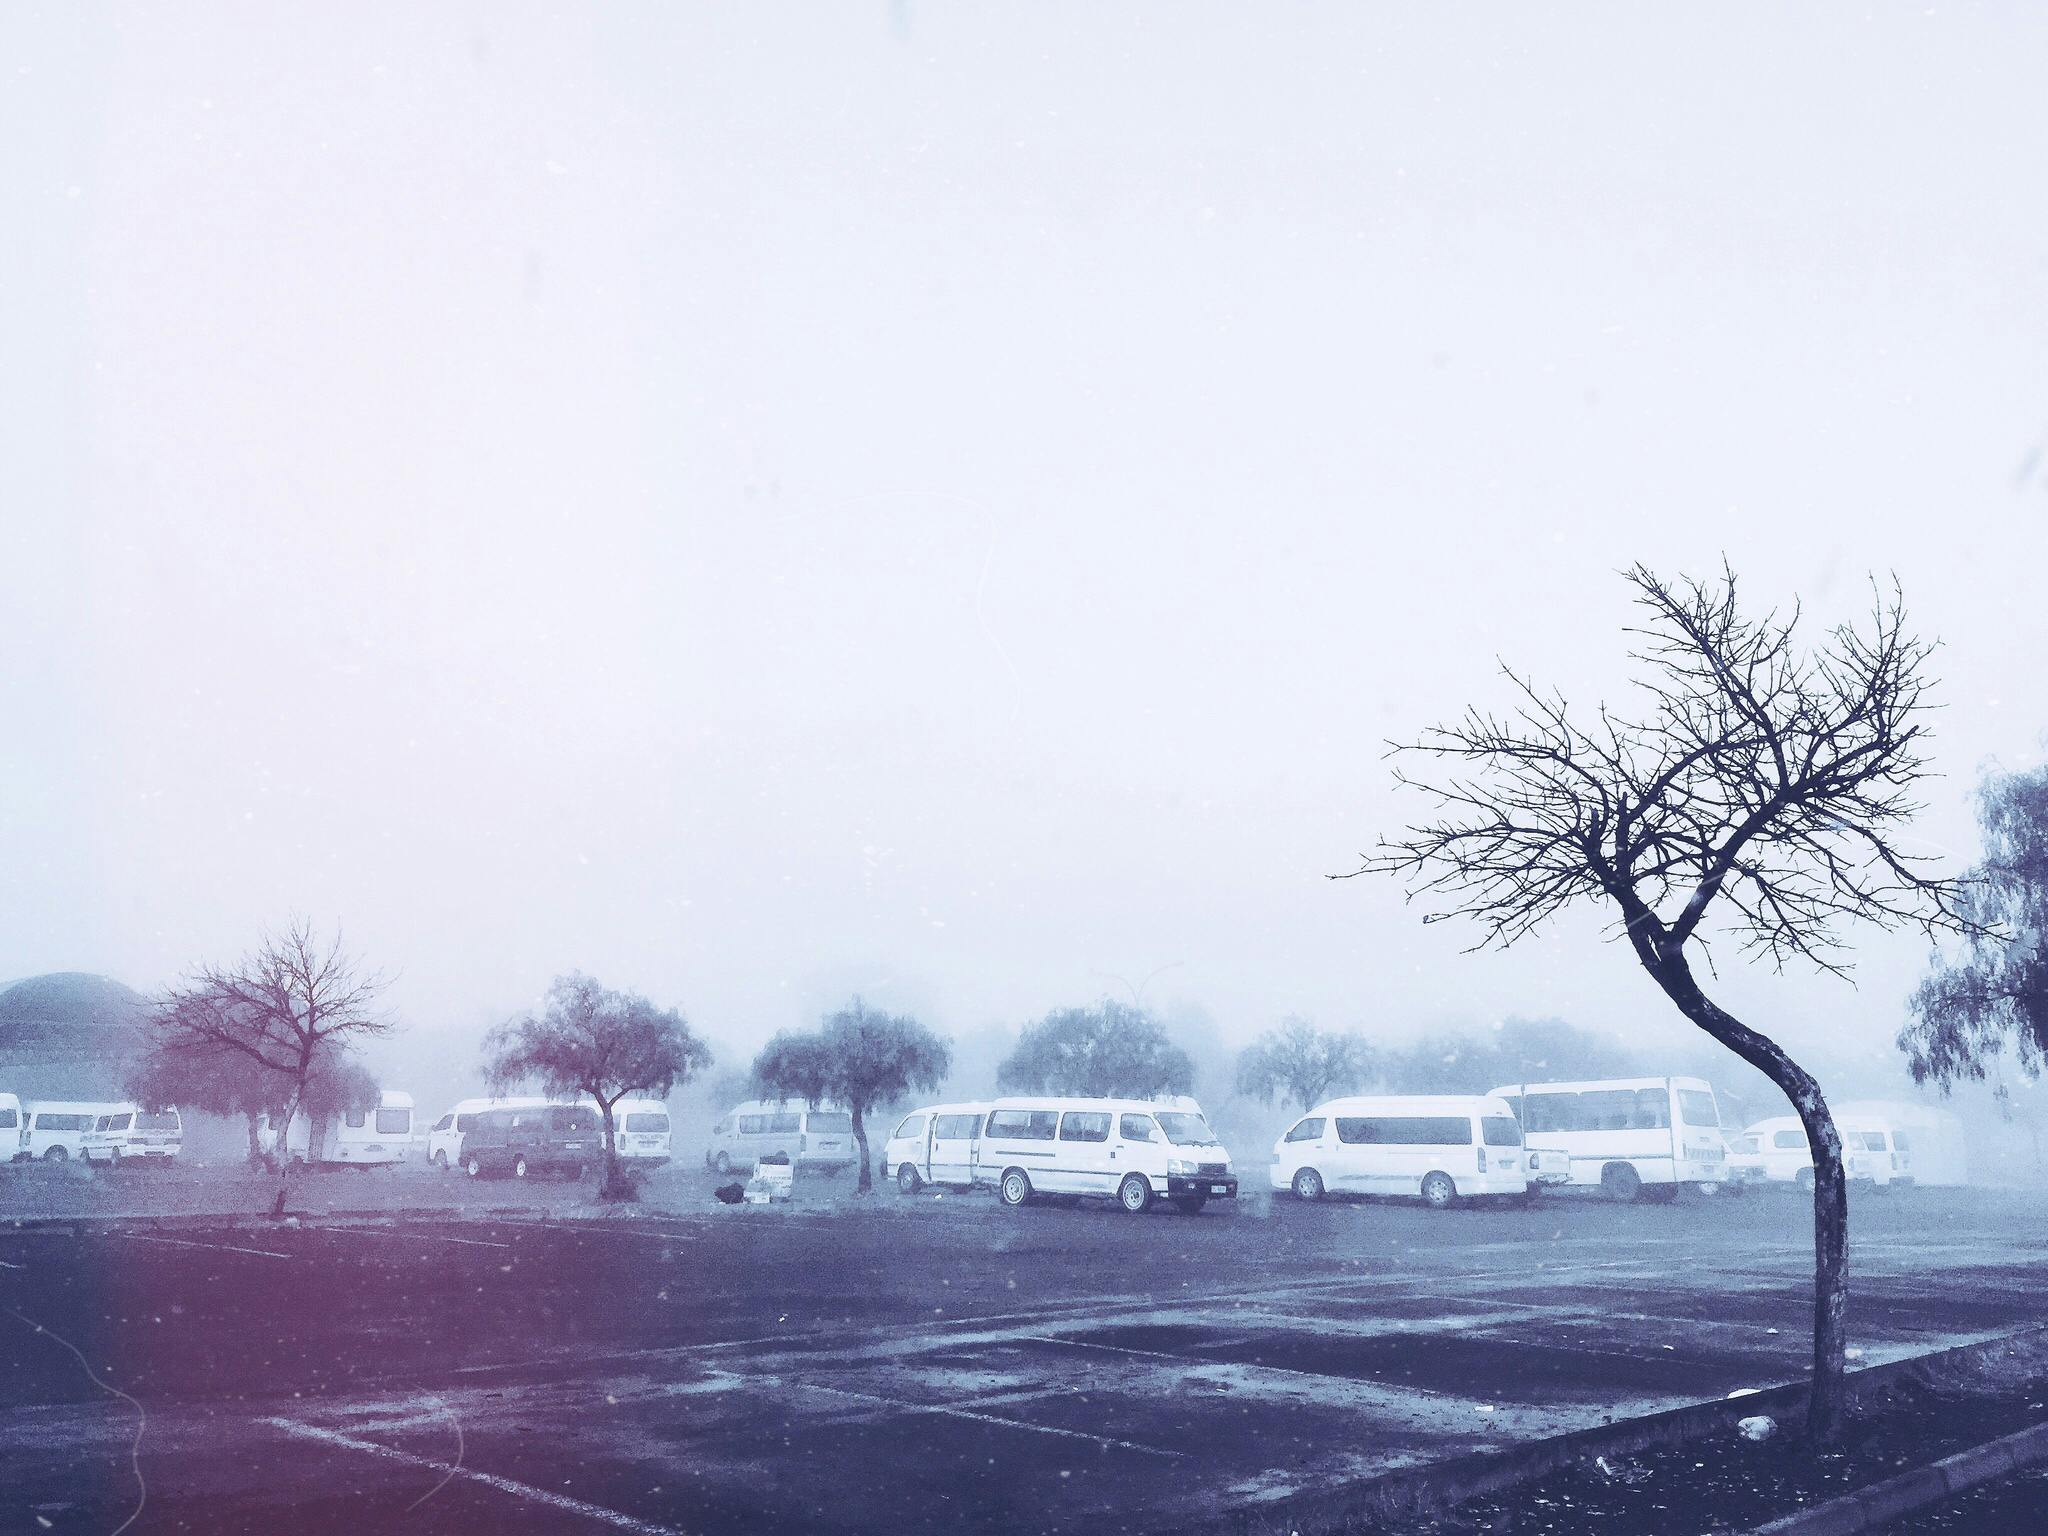 Free stock photo of South African Taxi rank on a cold morning